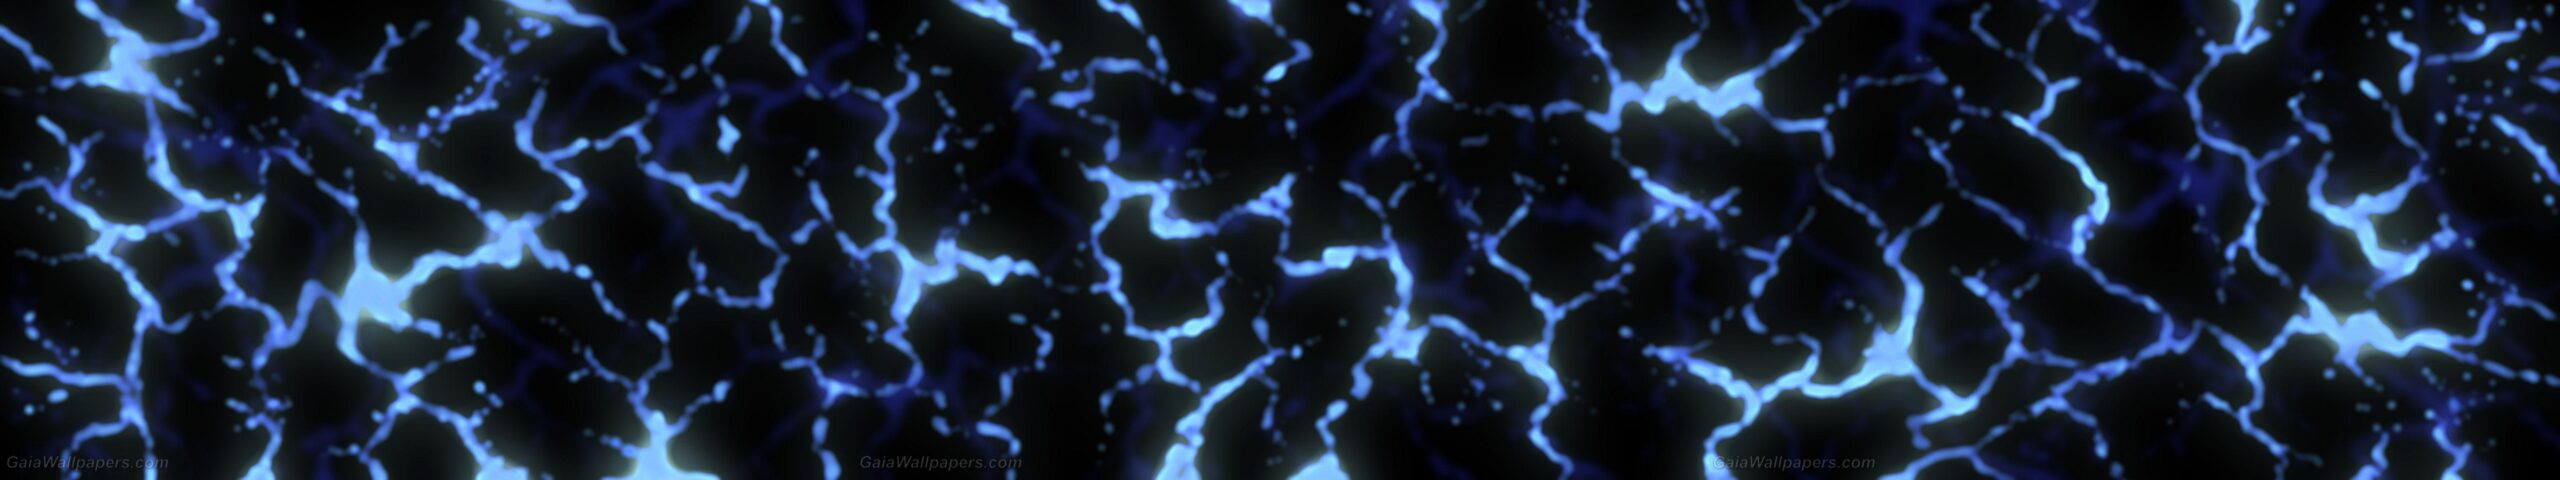 Electric blue plasma wallpapers